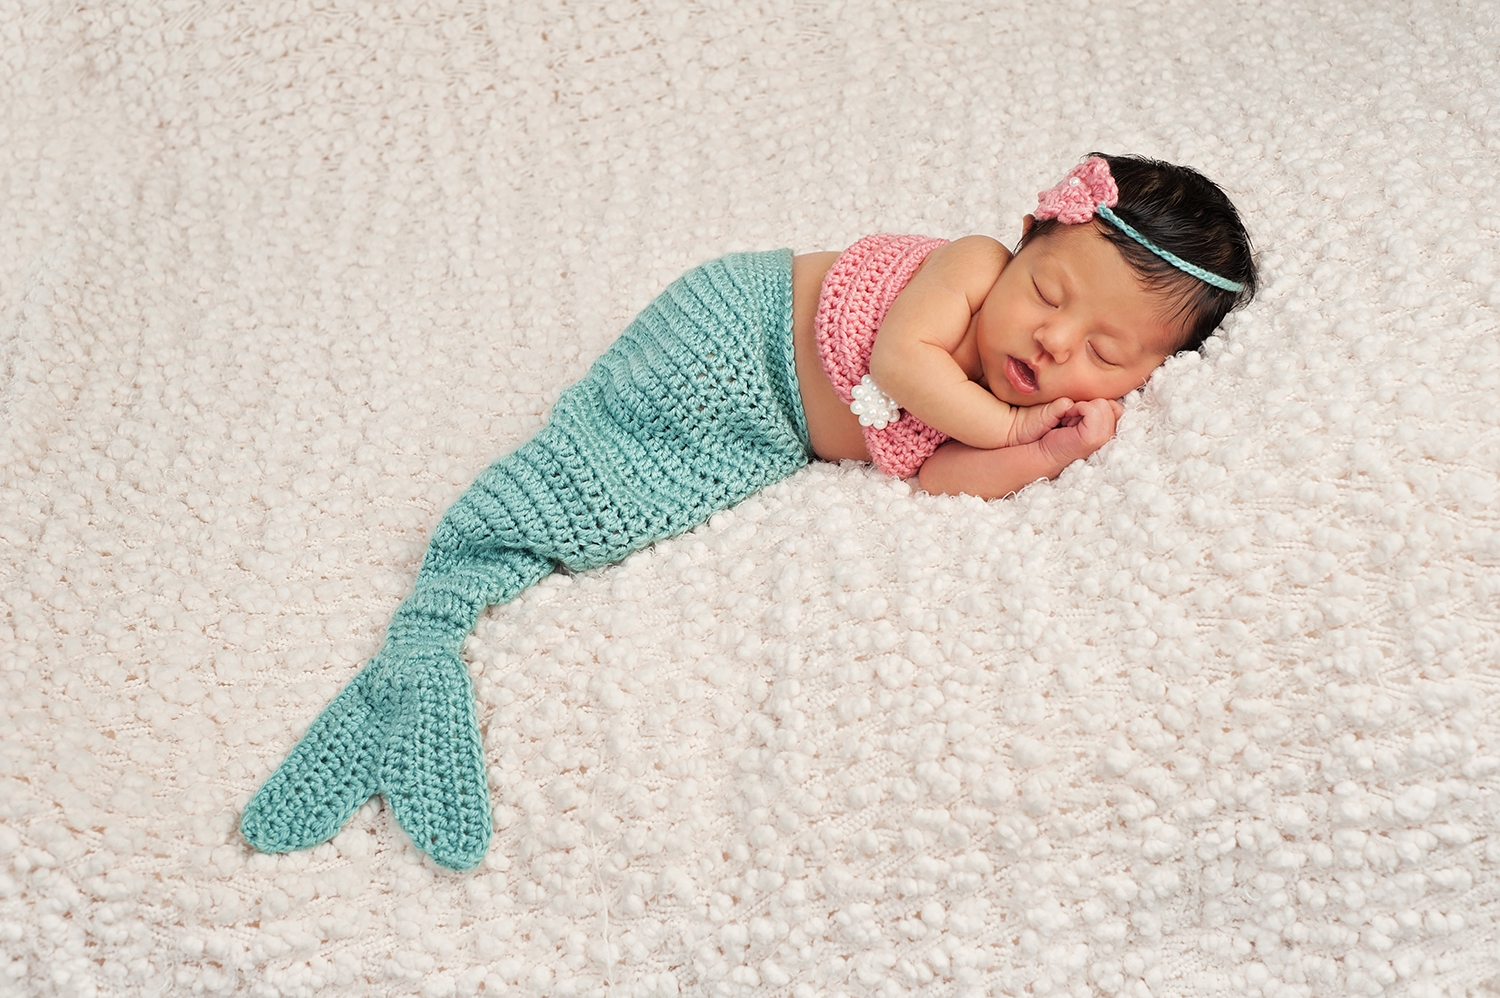 A sleeping newborn baby wearing a green crocheted mermaid tail which is one of the best ocean costumes for kids